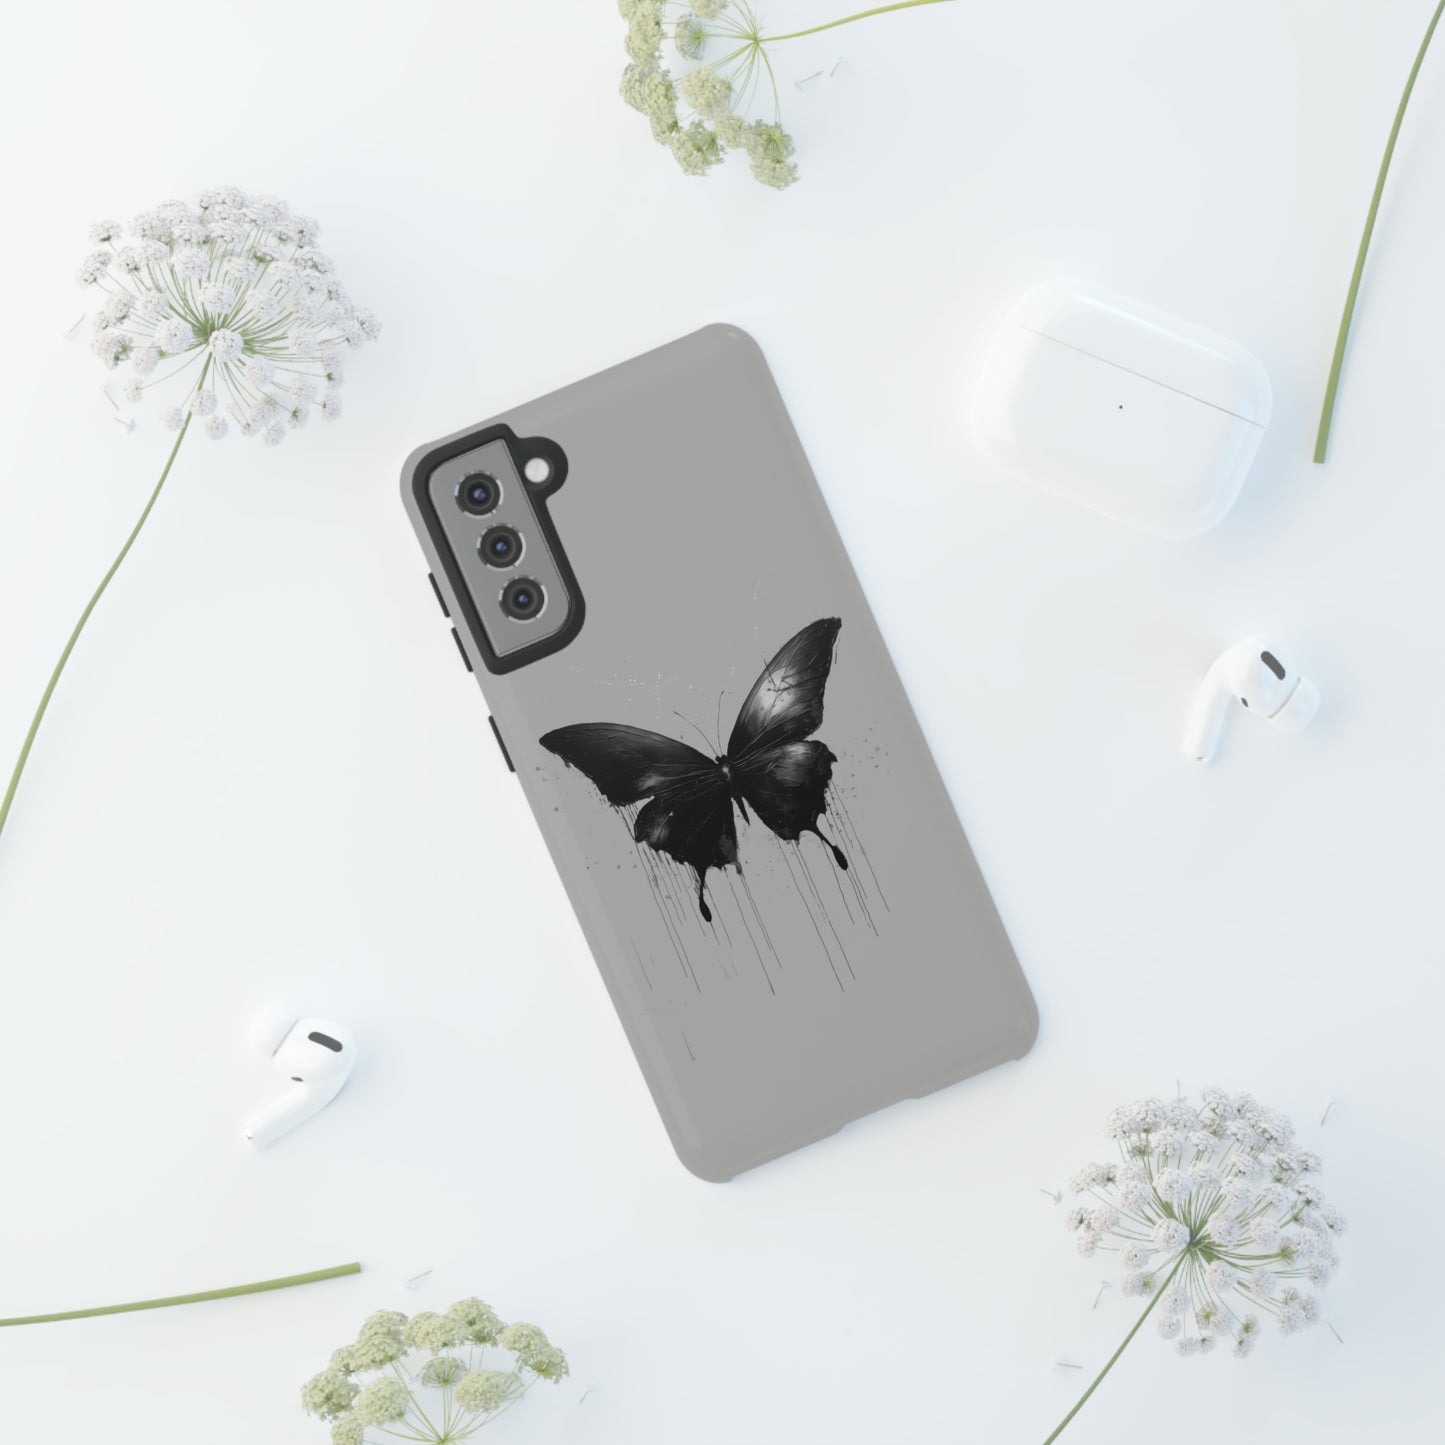 Tough Cases Butterfly Phone Case for various iphone sumsung google models. Grey Dripping Artistic AI Made Cool Artsy Design Dark Style Edgy